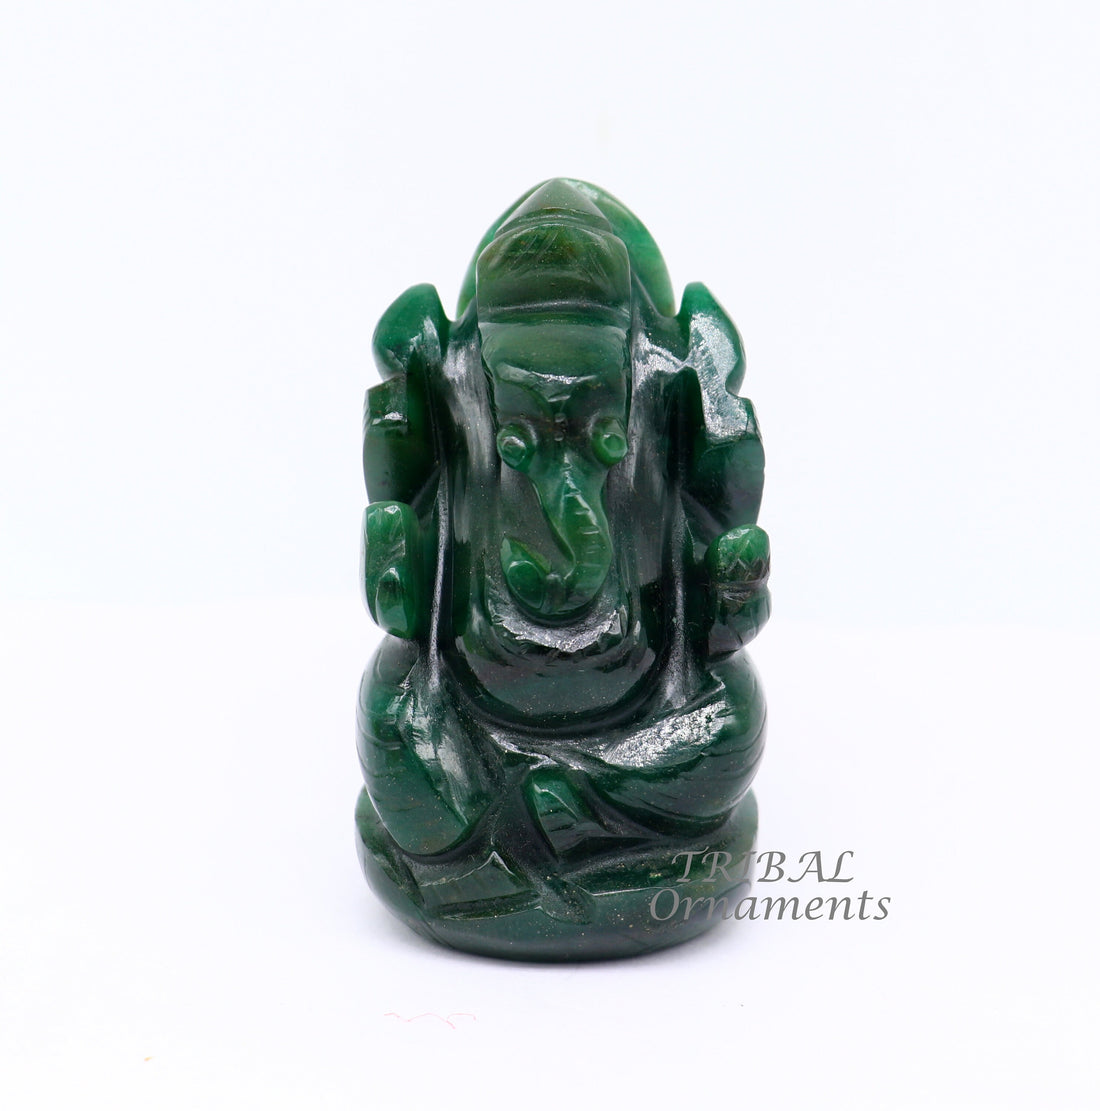 Amazing green jade Lord Ganesha handcrafted statue figurine temple divine God Ganesha stone sculpture for wealth and prosperity stna11 - TRIBAL ORNAMENTS